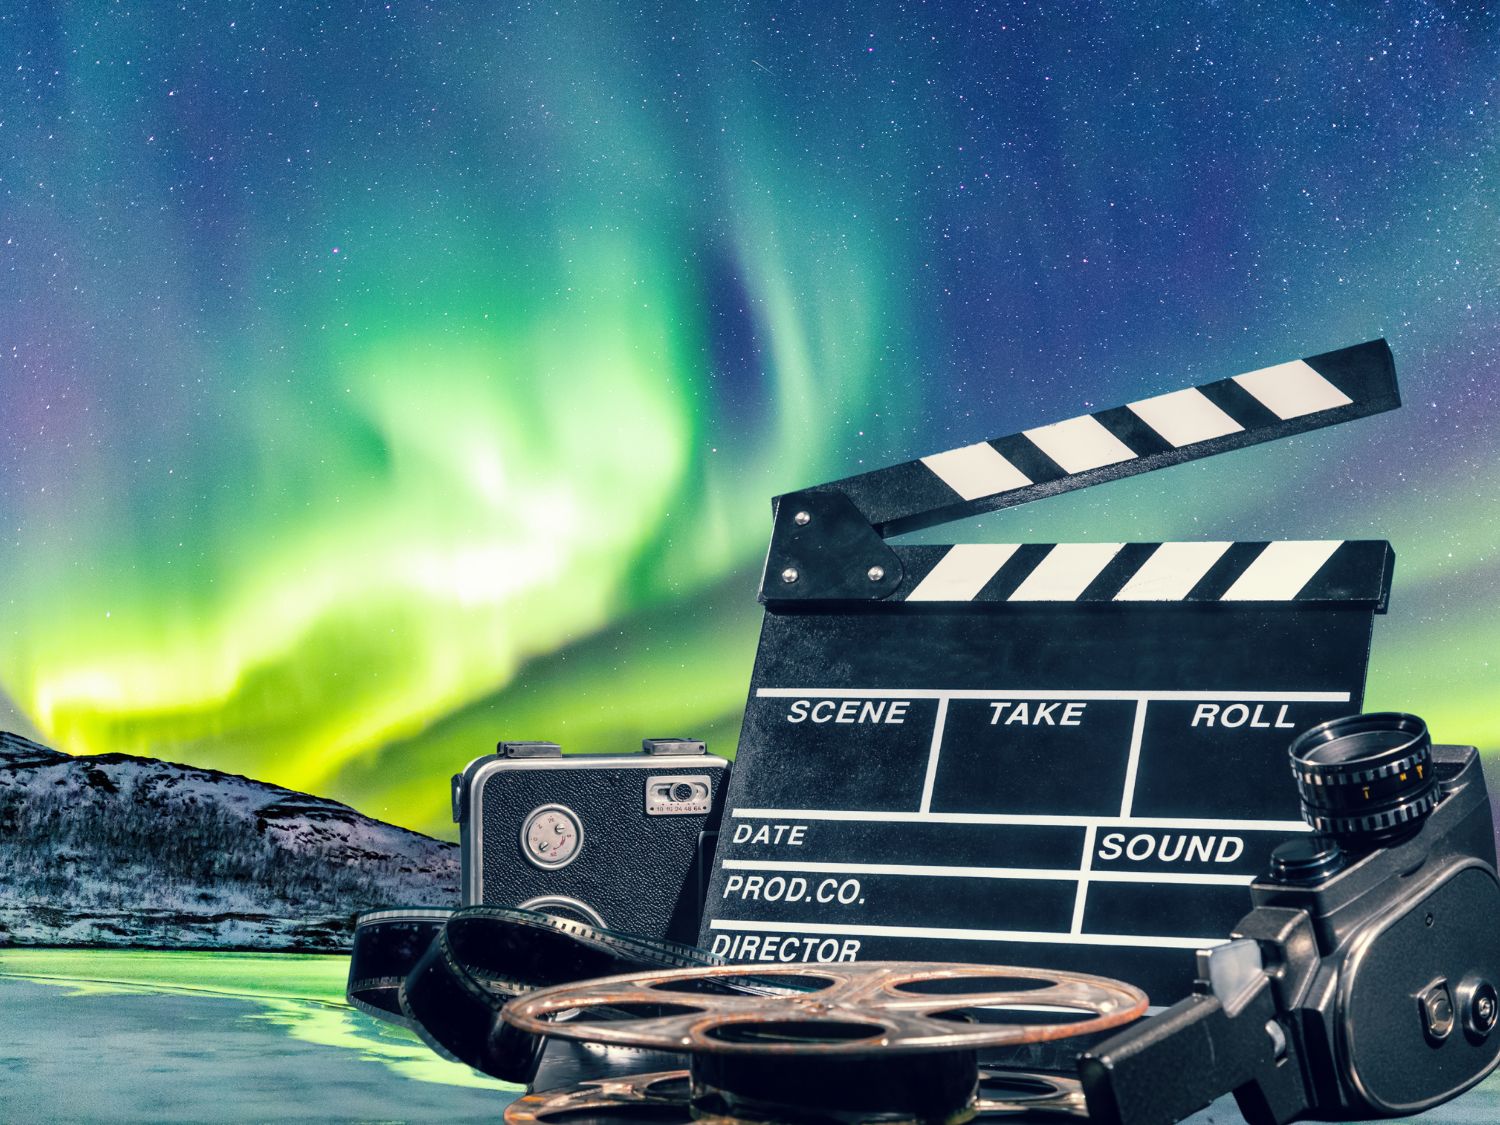 13 extraordinary movies set in finland that will inspire you to visit